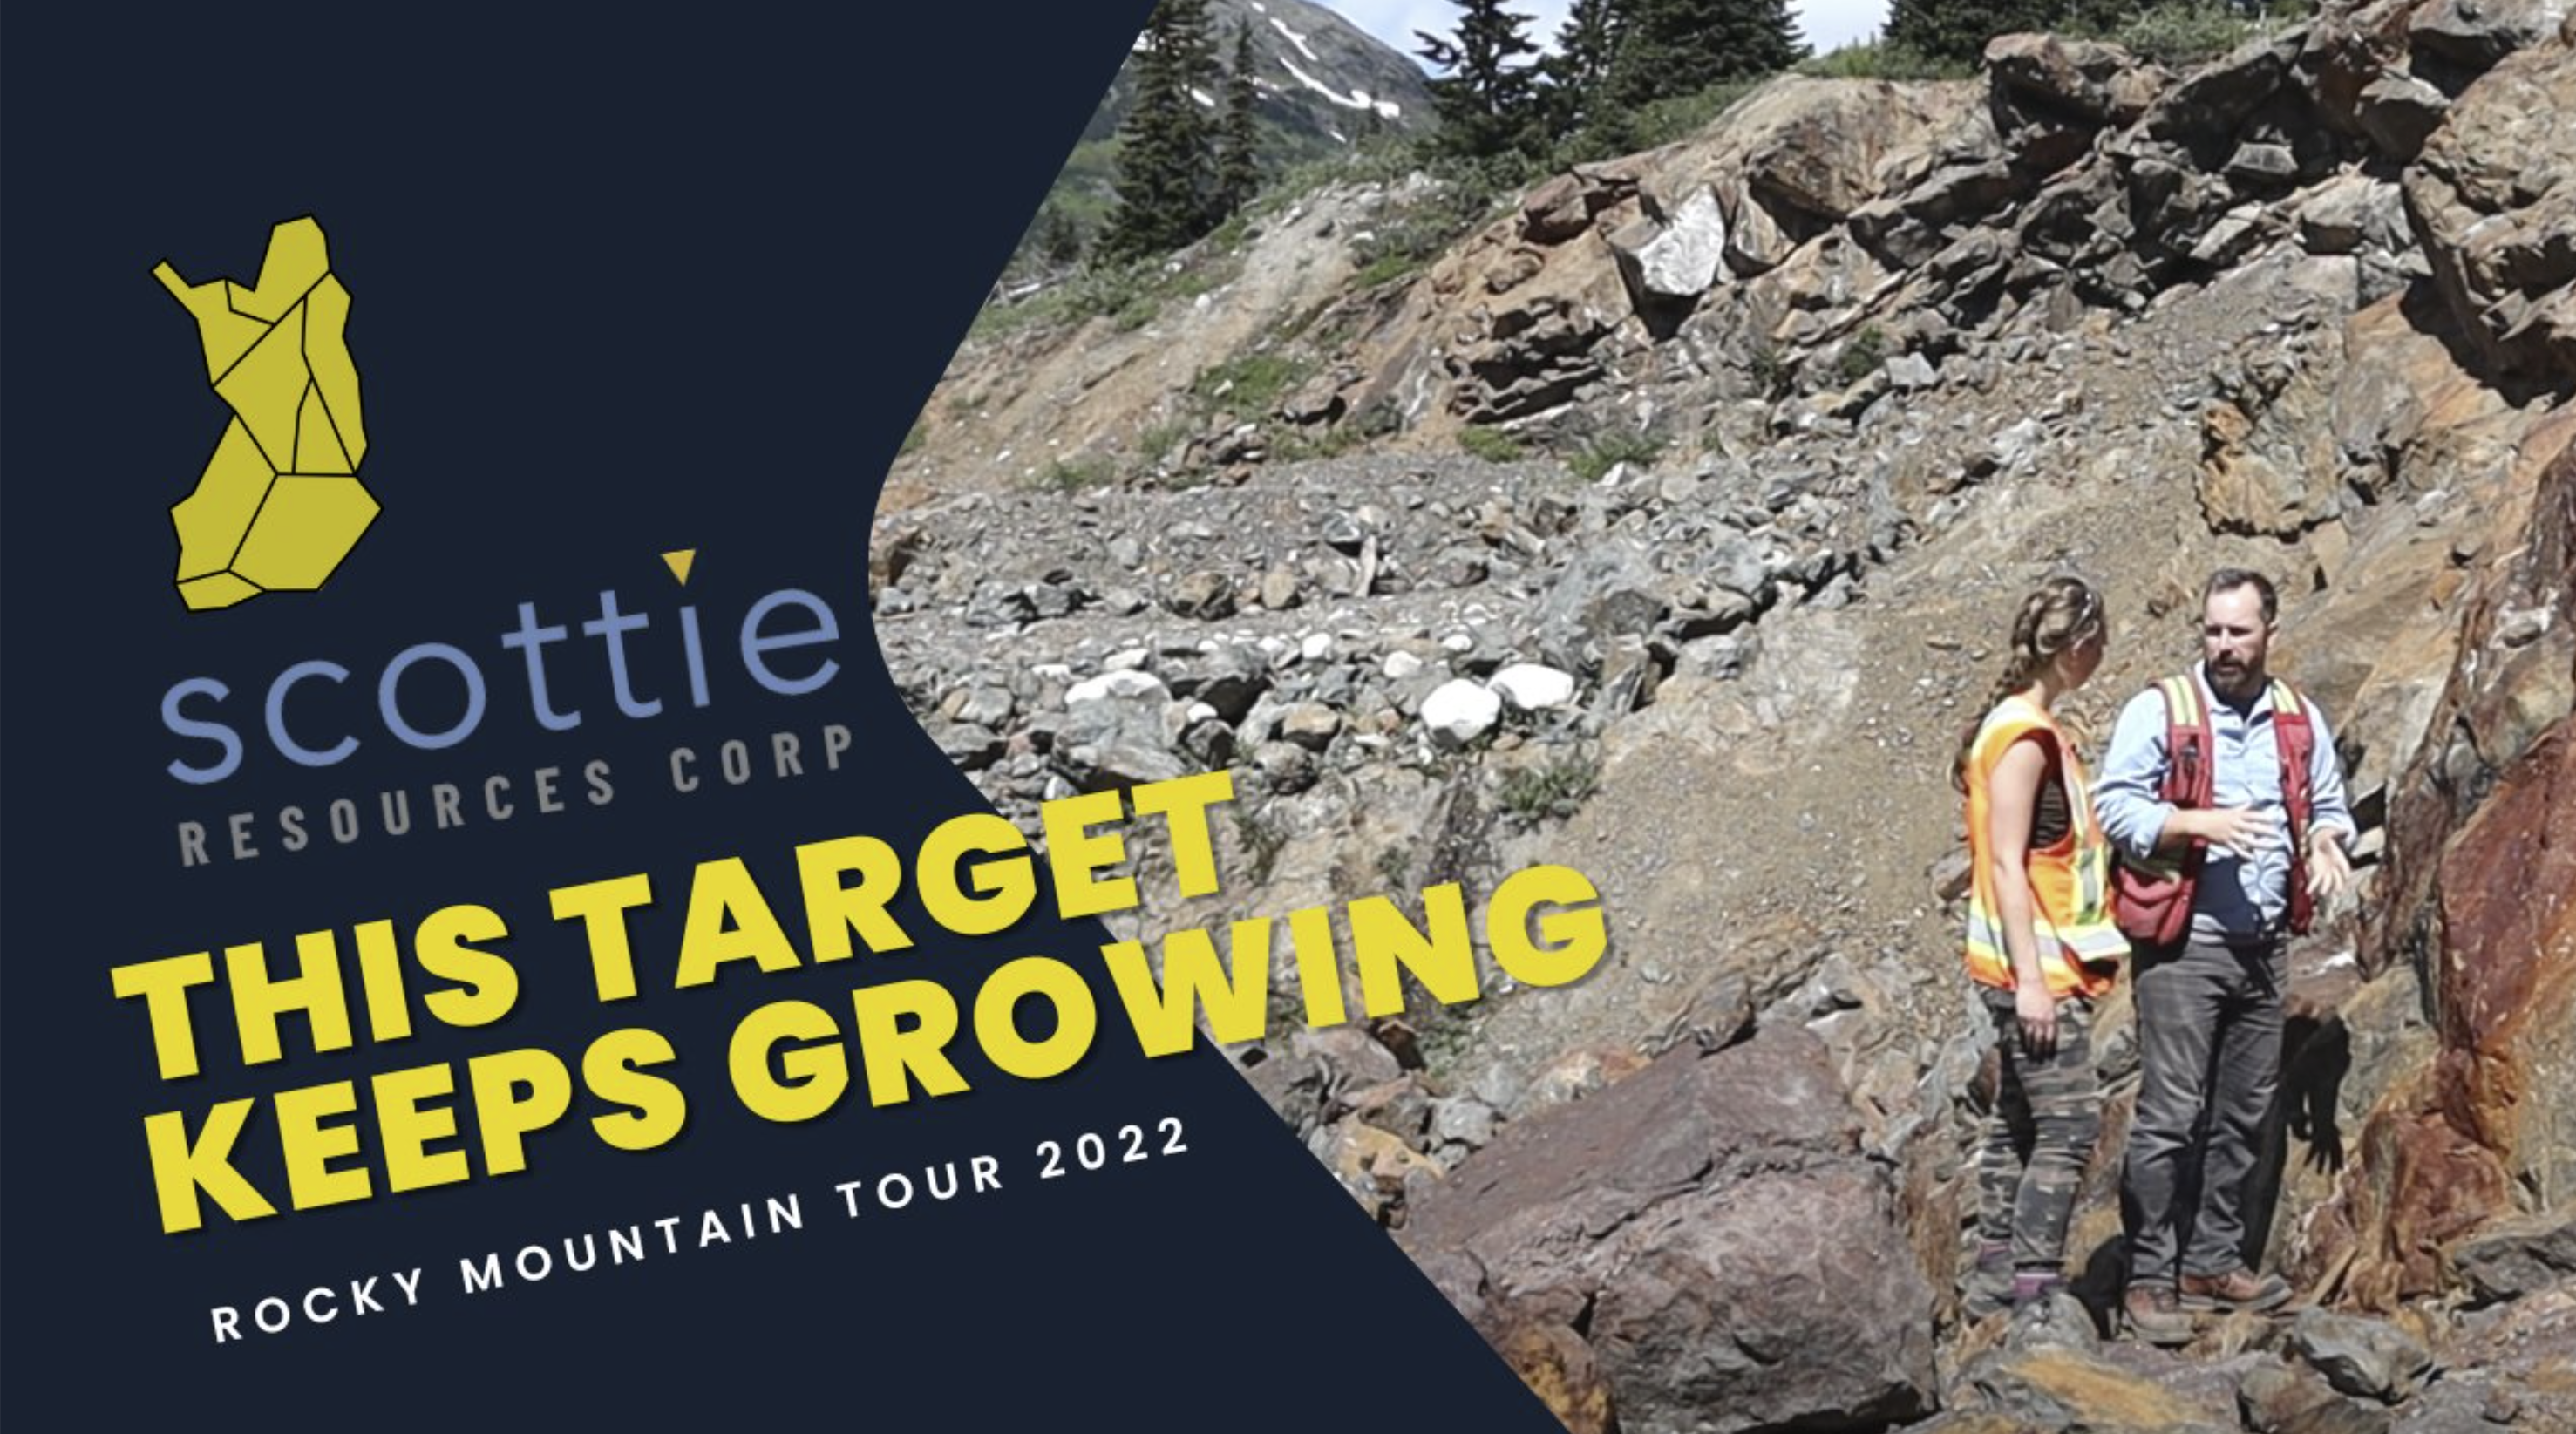 Spotlight Mining | This Target Keeps Growing | On Site at the Scottie Gold Mine 2022